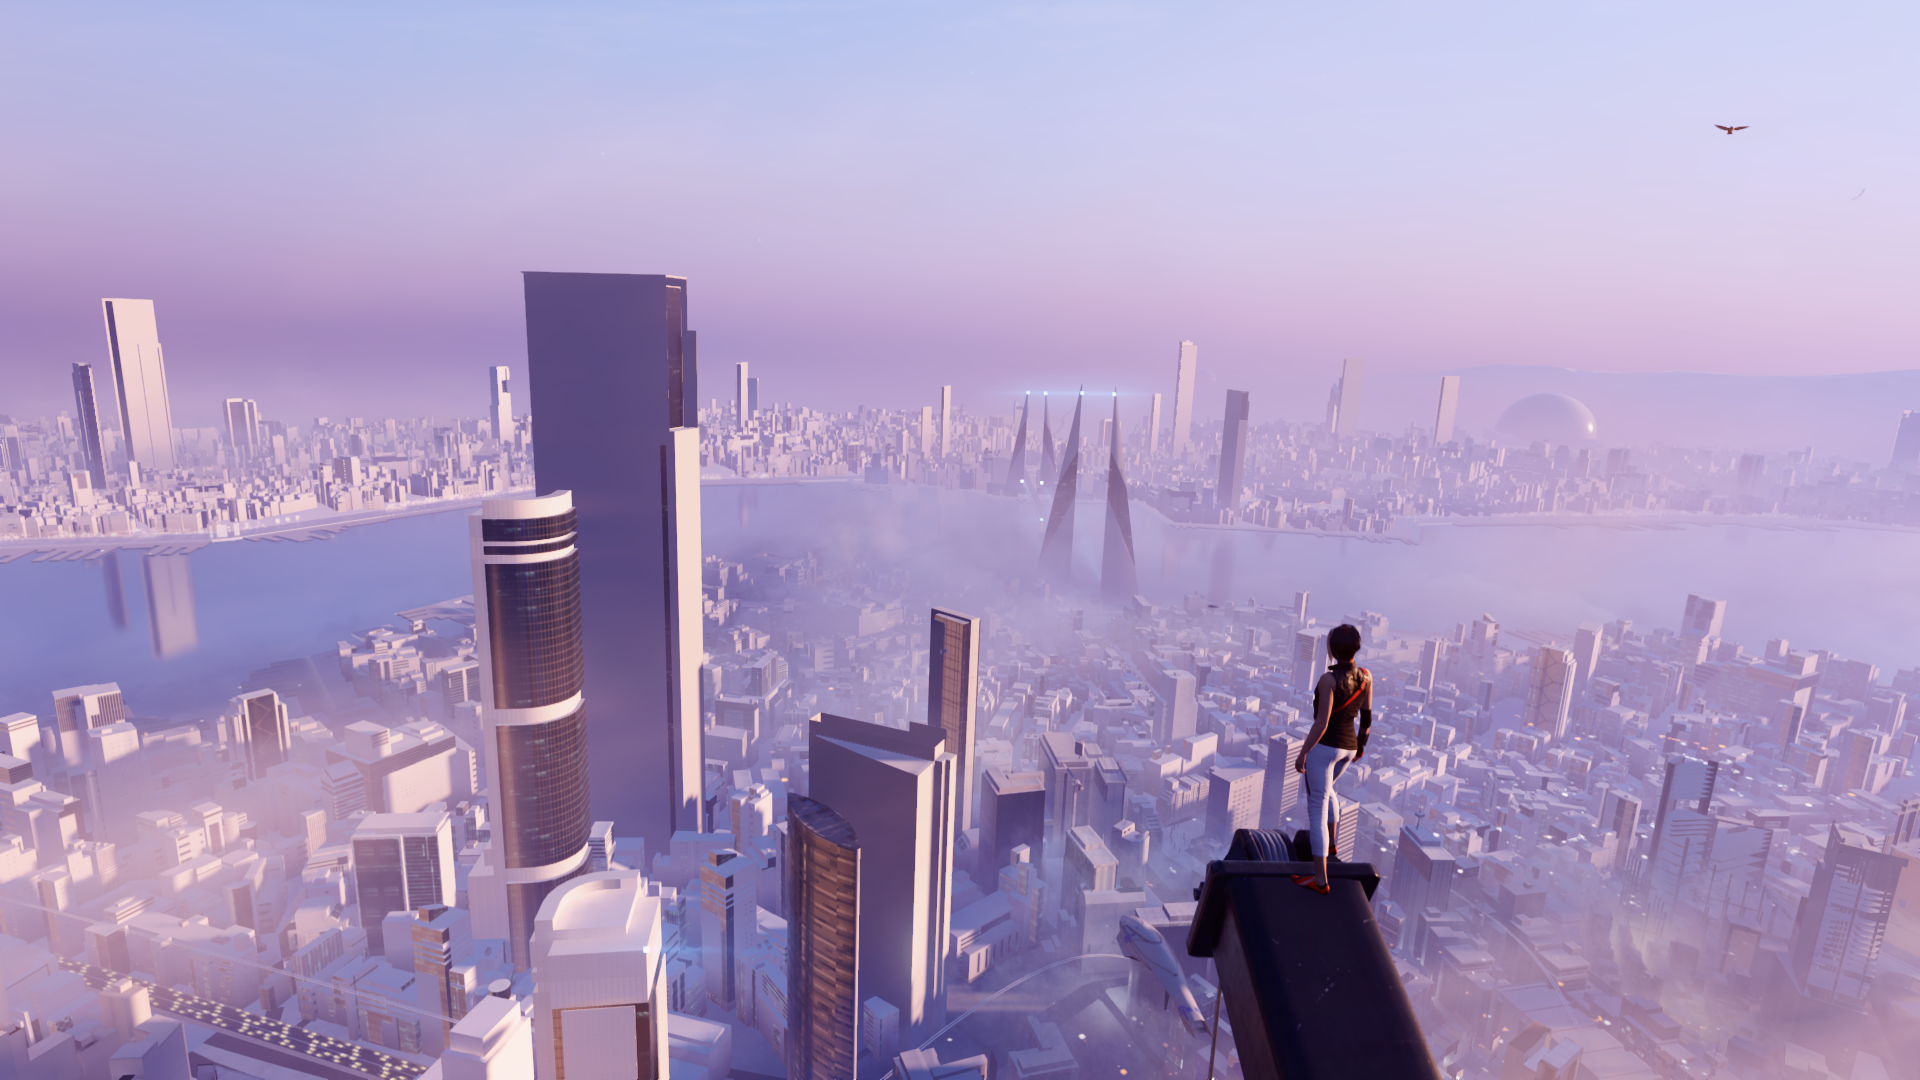 General 1920x1080 Mirror's Edge Catalyst urban Futurism PC gaming screen shot cityscape Mirror's Edge video game art city video games sky building skyscraper video game characters CGI video game girls standing clouds sunlight water reflection sleeveless shirt